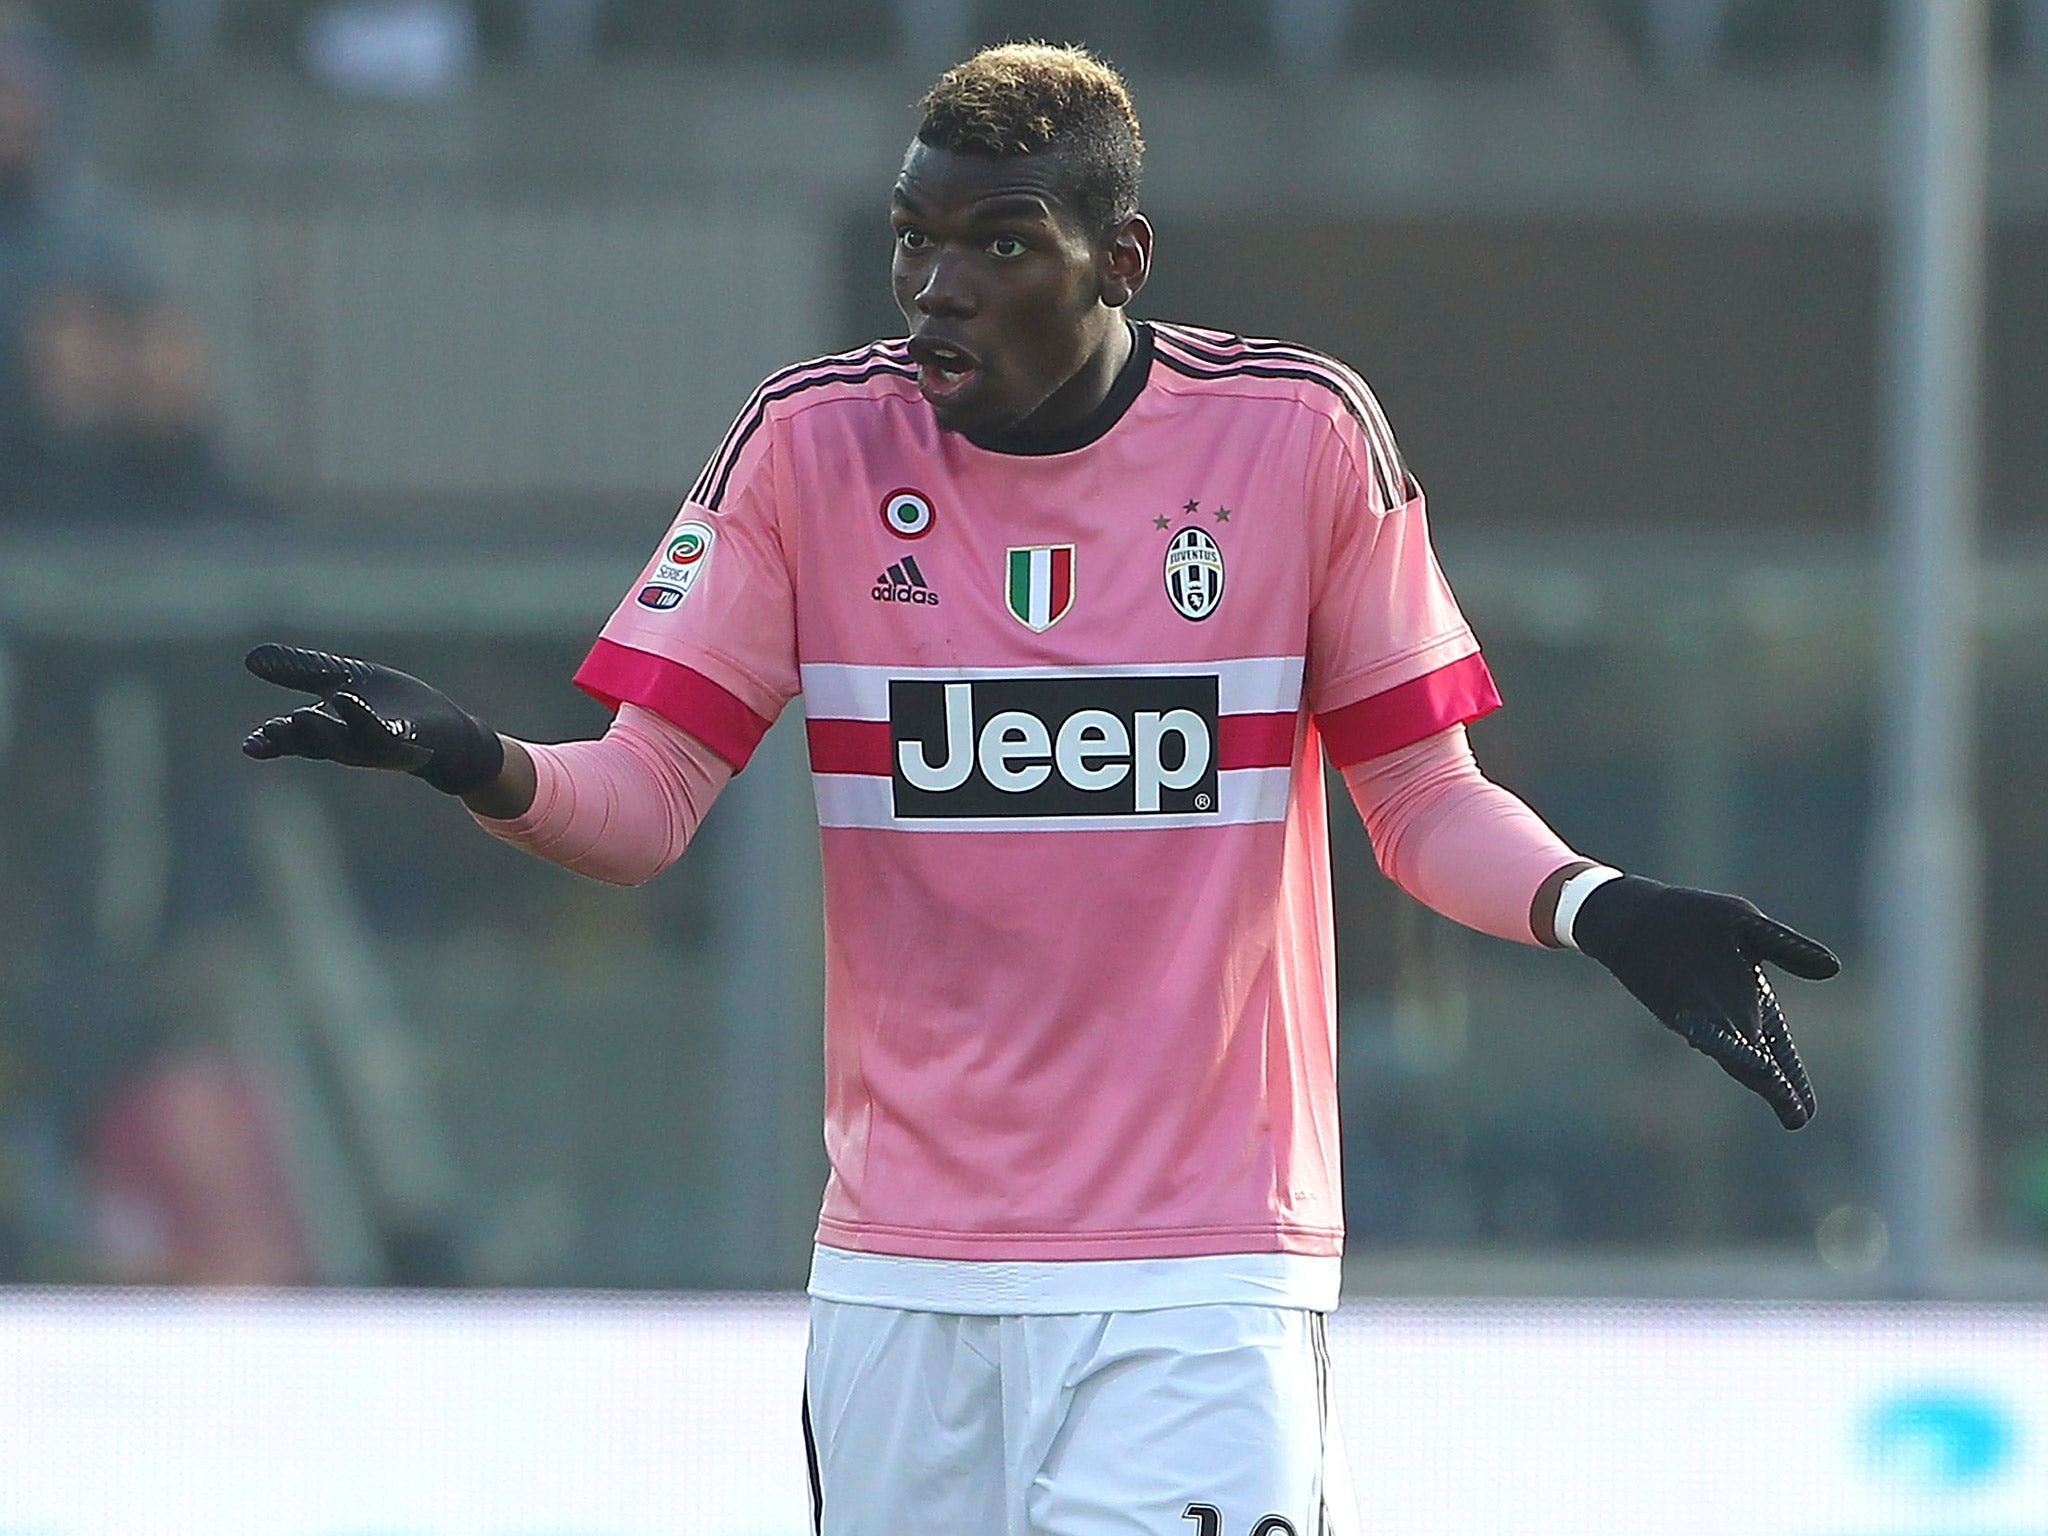 Paul Pogba will return from holiday this week to seal a move to Manchester United